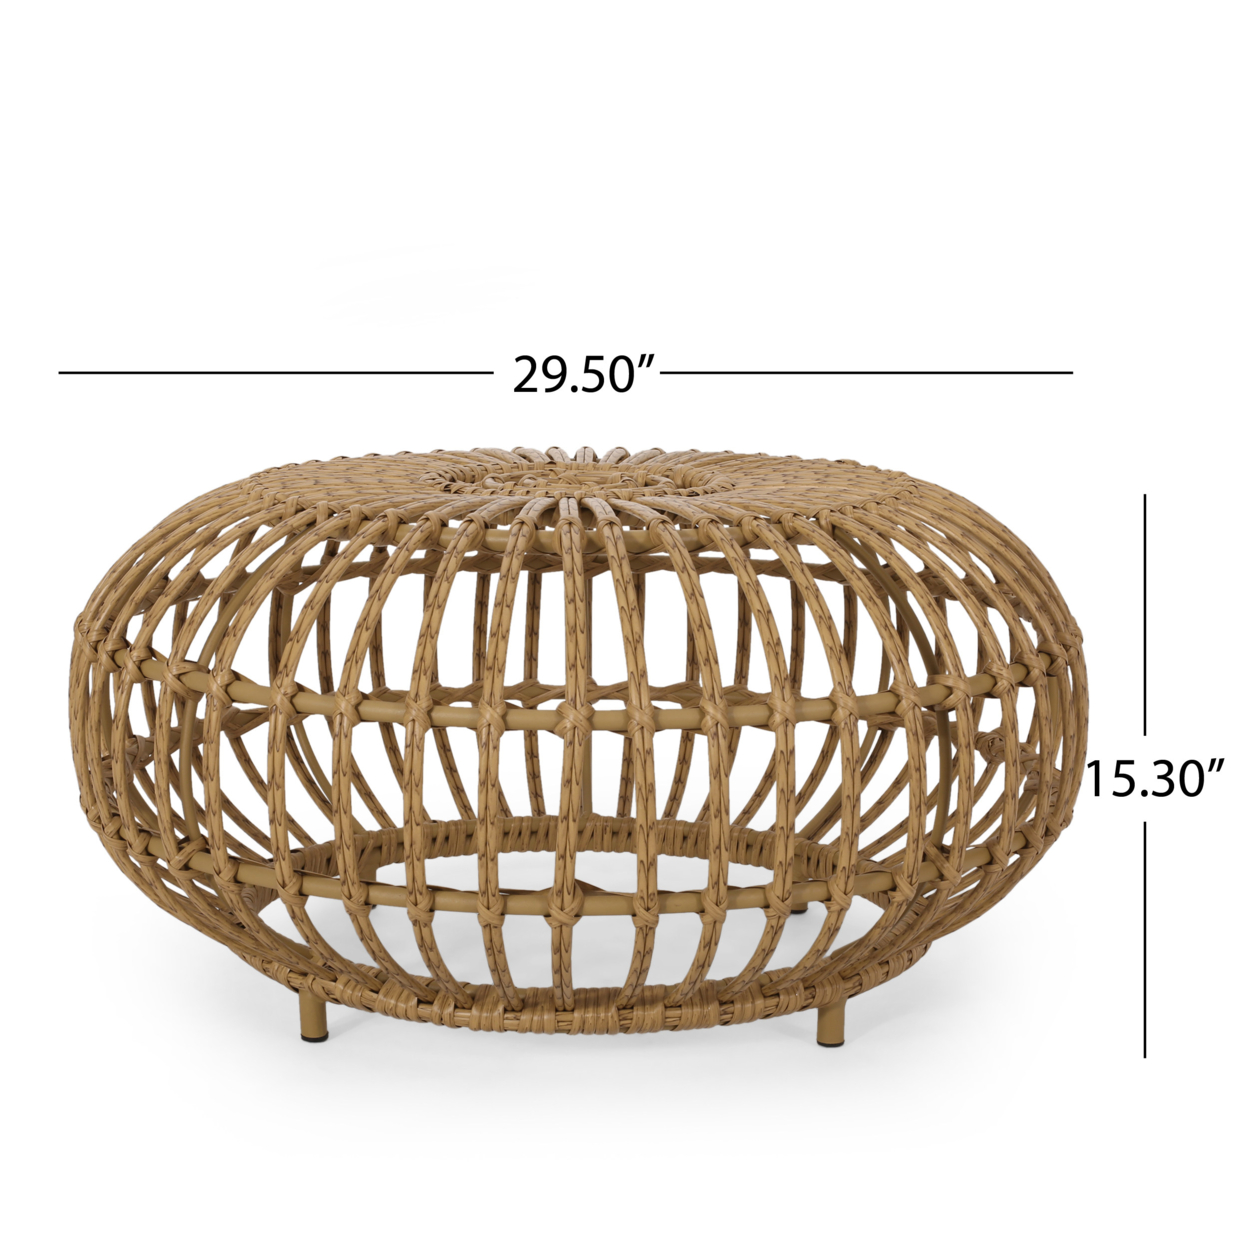 GDF Studio Whitetail Outdoor Boho Wicker Coffee Table, Light Brown - image 3 of 7